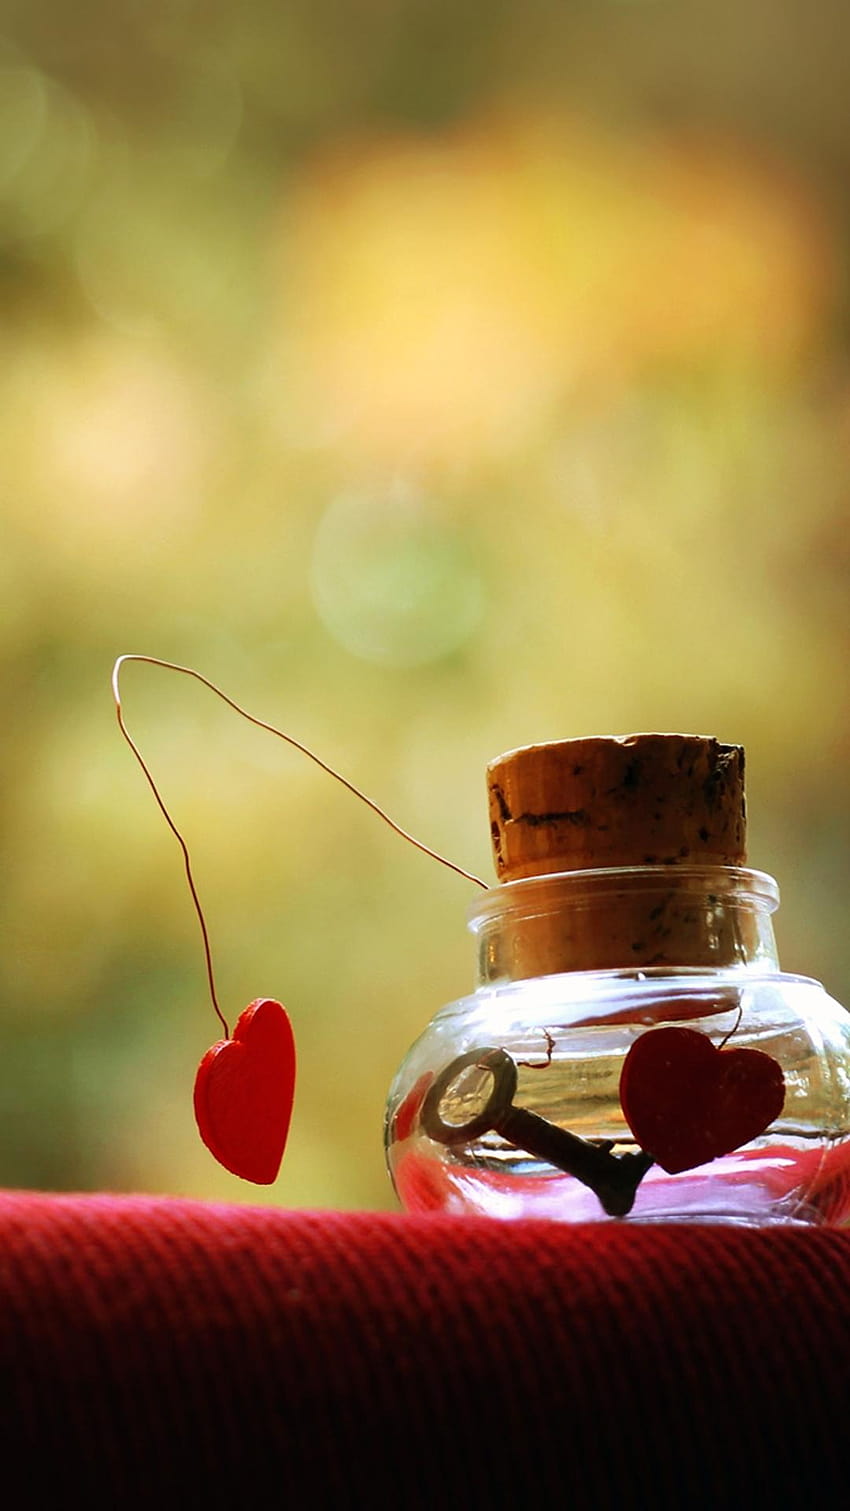 The key of my heart is locked in a bottle, vertical valentines HD phone wallpaper